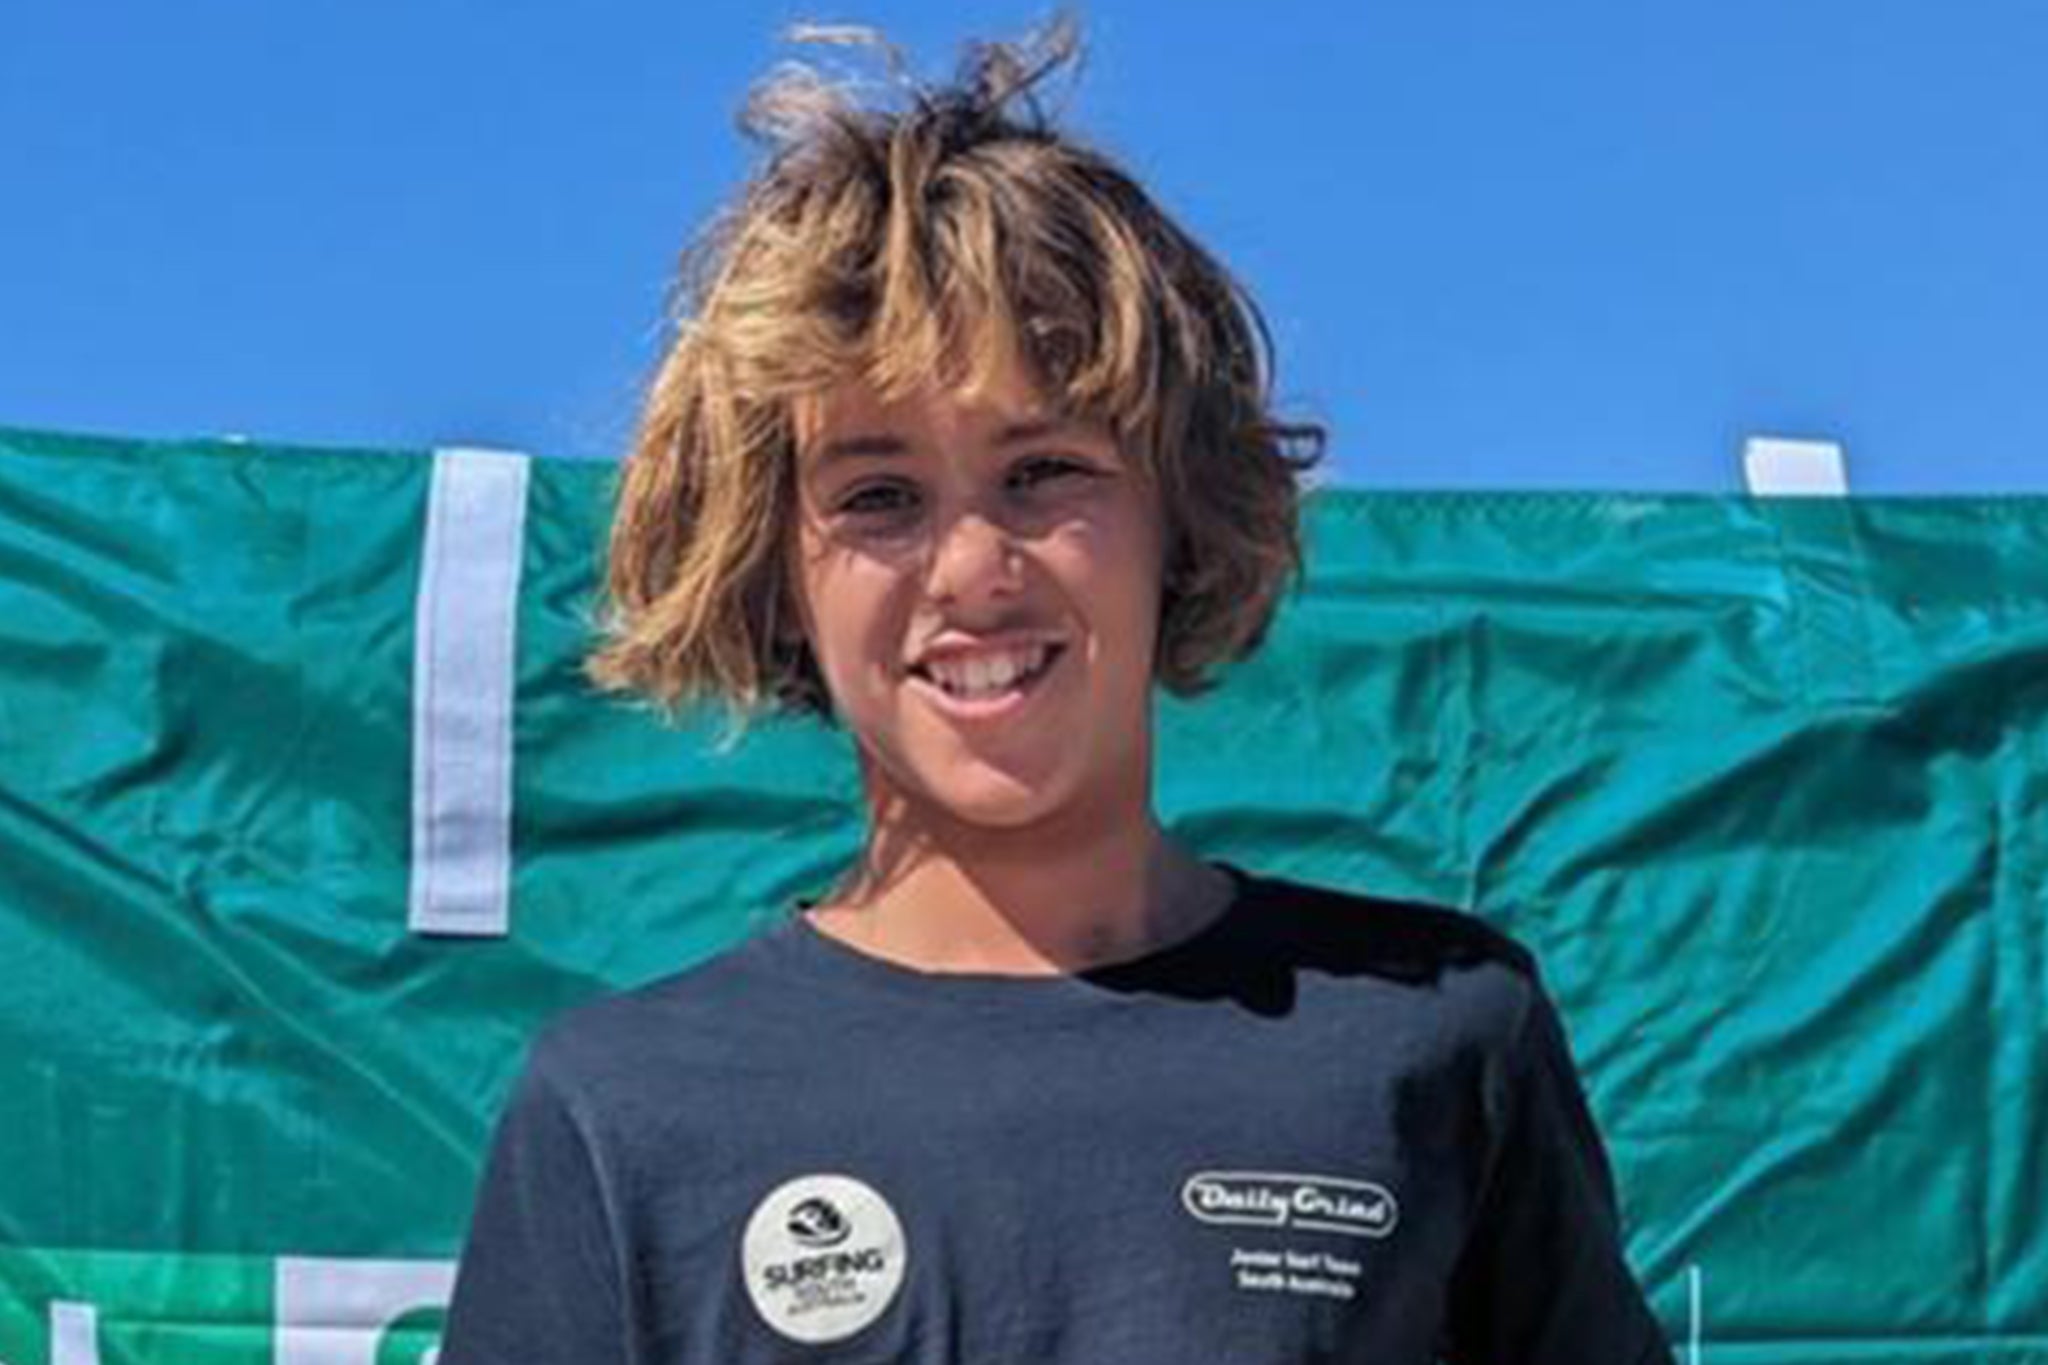 Hundreds of mourners have gathered at the favourite beach of a 15-year-old surfer who was killed in a horror shark attack